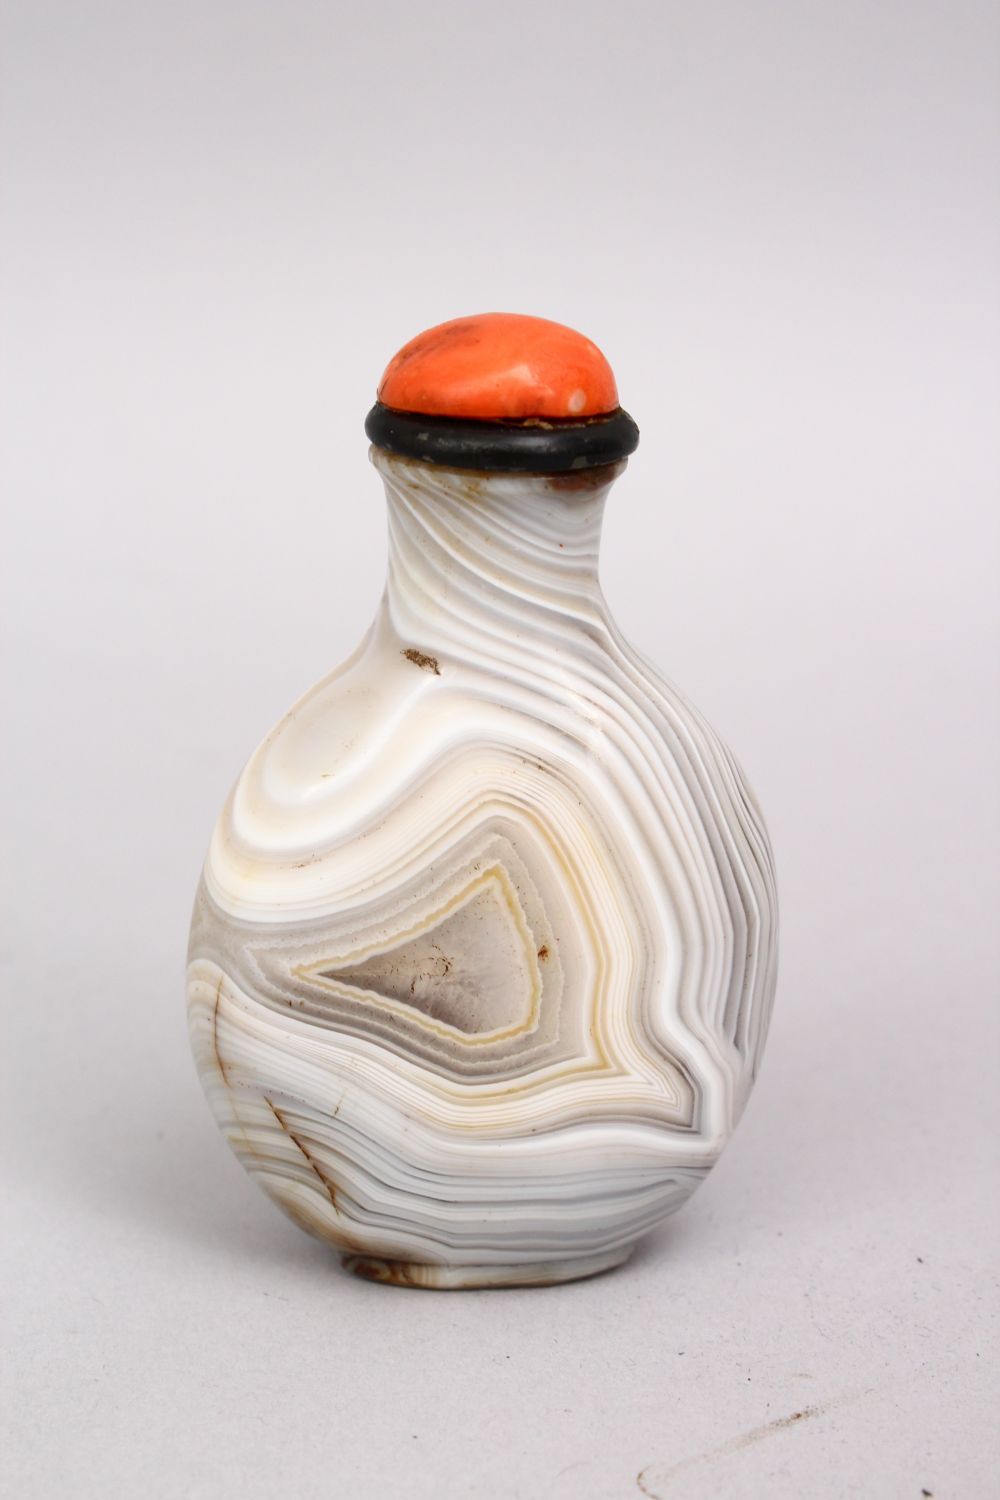 A FINE 19TH / 20TH CENTURY CHINESE CARVED AGATE SNUFF BOTTLE, with a coral stopper, 8cm. - Image 2 of 2